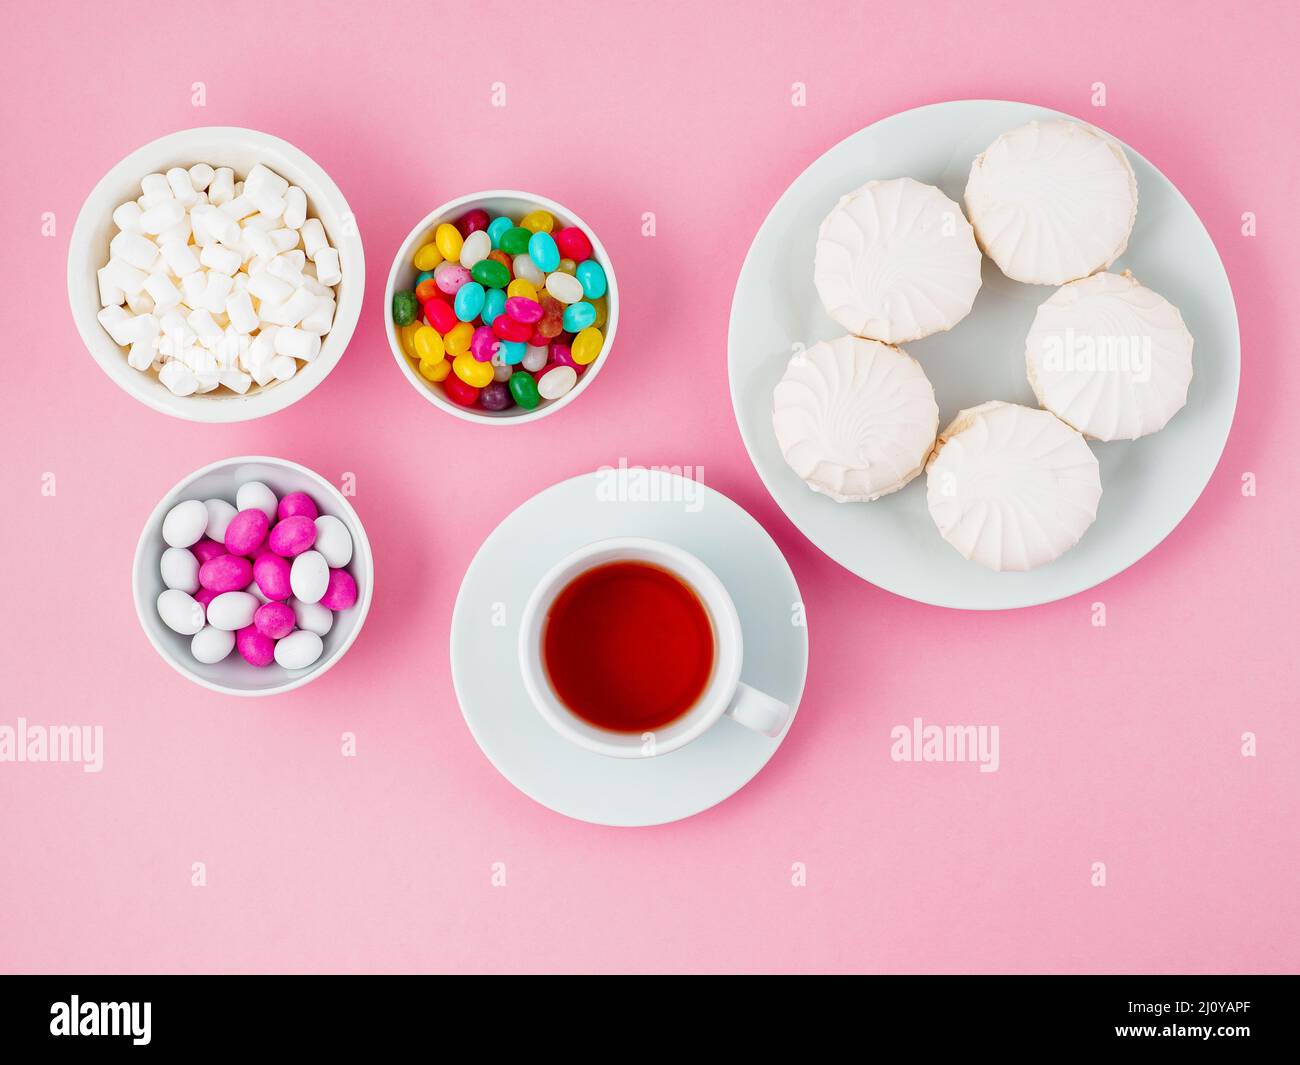 Cup of tea, plates of different sweets-marshmallows, lollipops, candy. Carbohydrates, glucose. Pink background, flat lay. Stock Photo